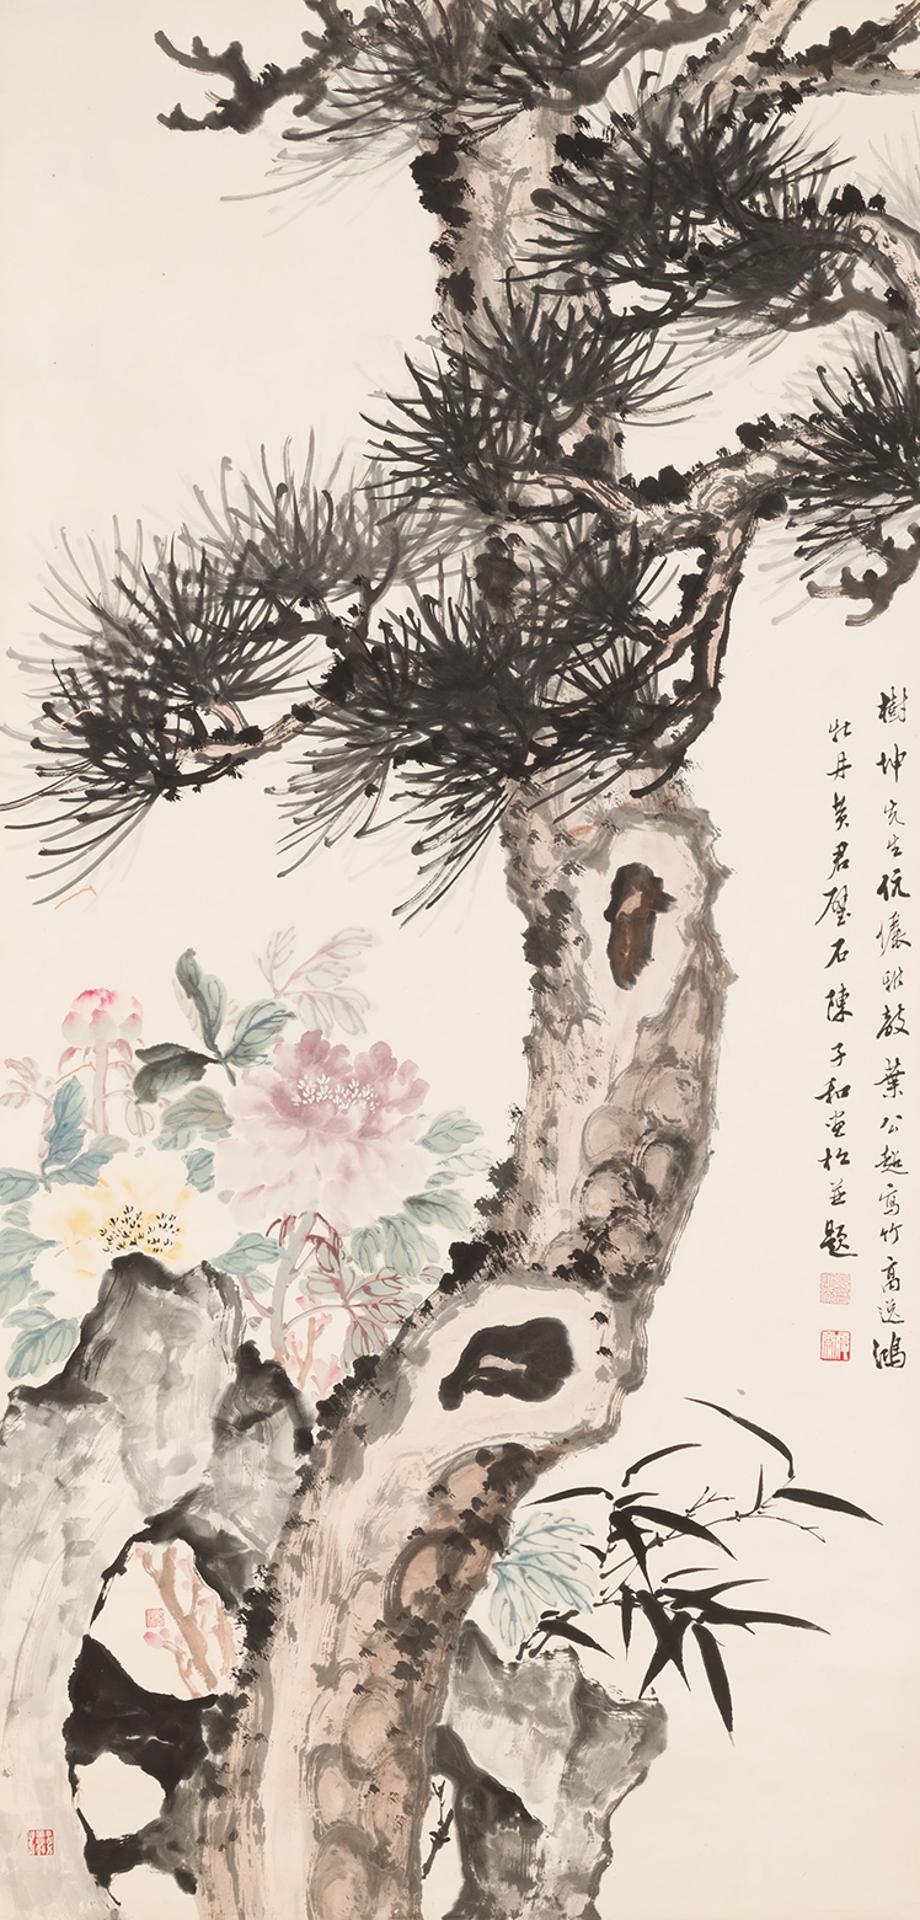 Huang Junbi (1898-1991) - Pine, Bamboo and Rocks with Chen Zihe